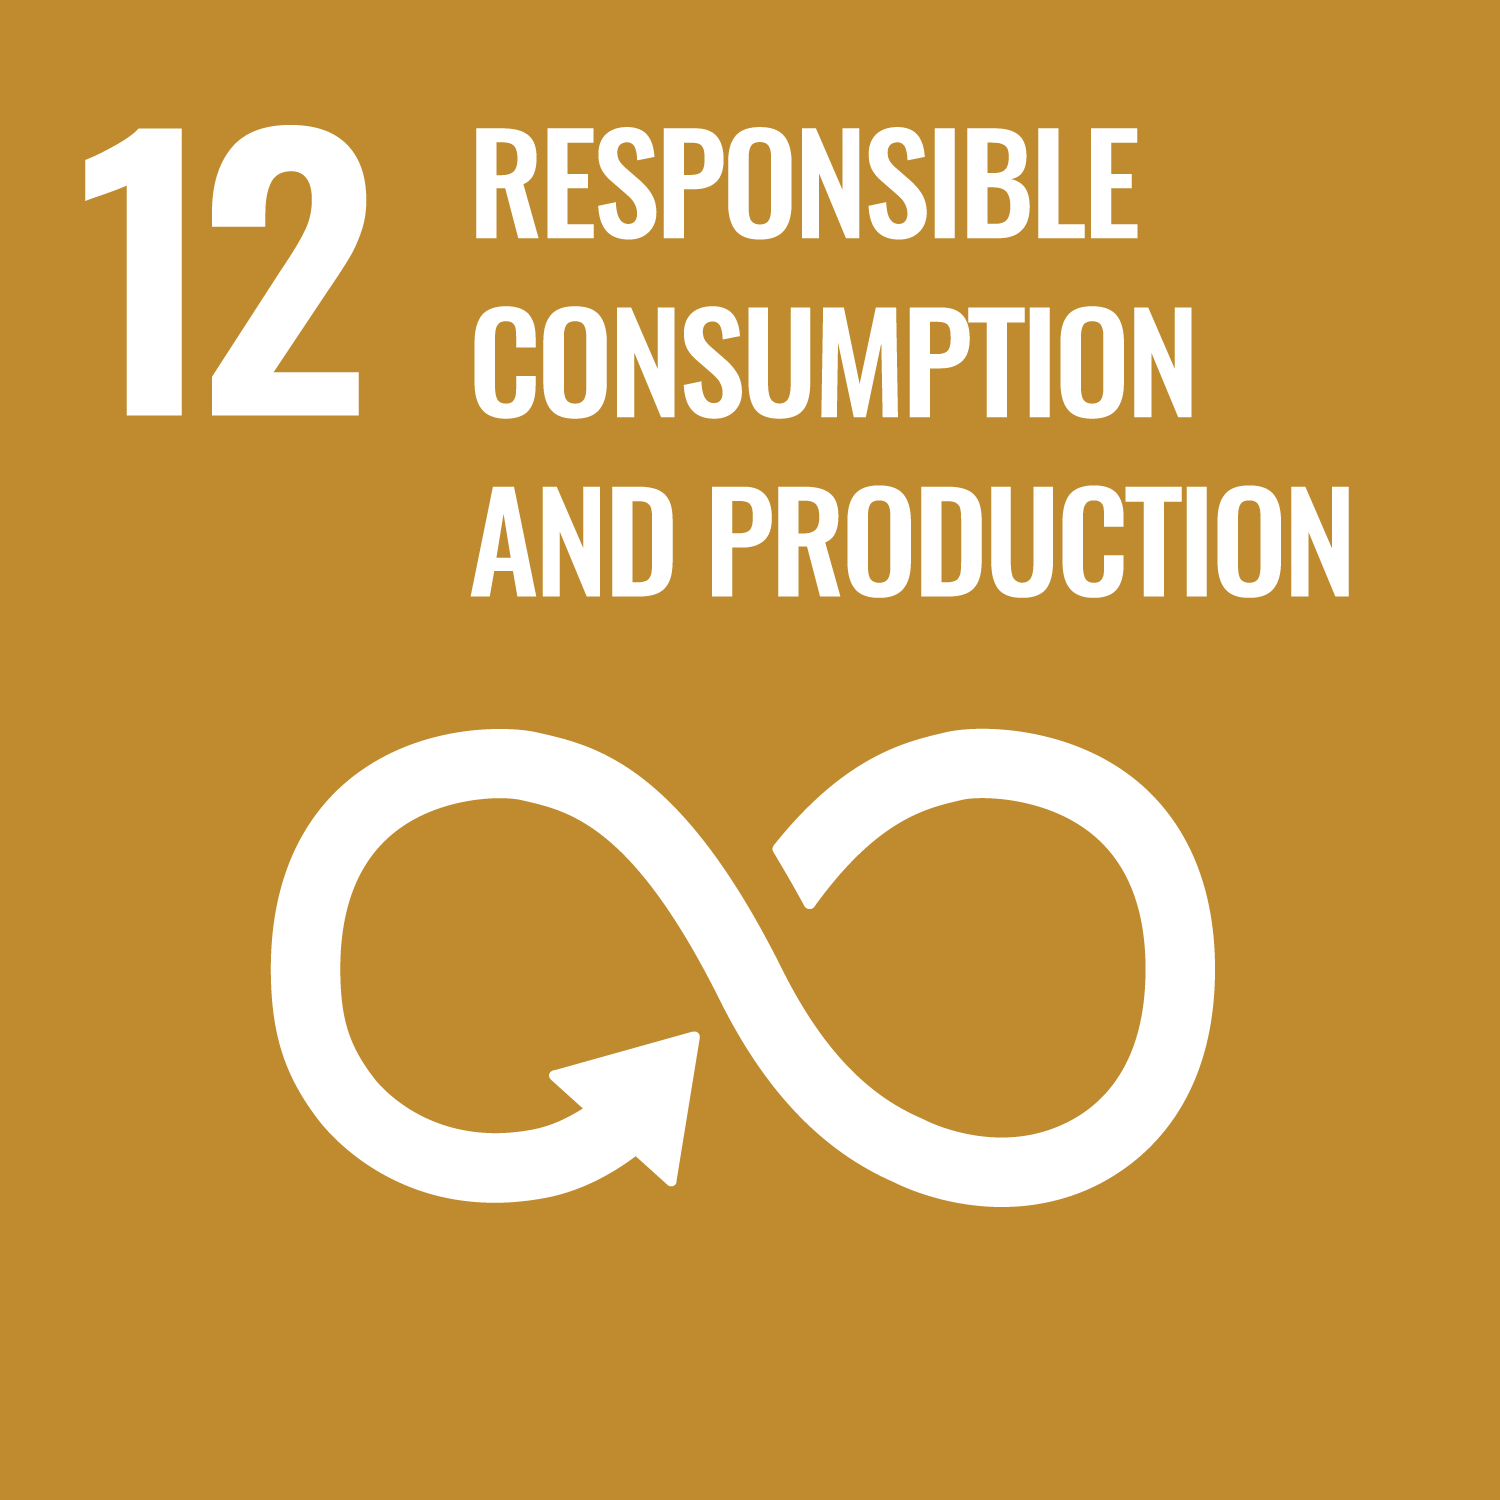 sustainable-development-goals-responsible-consumption-and-production